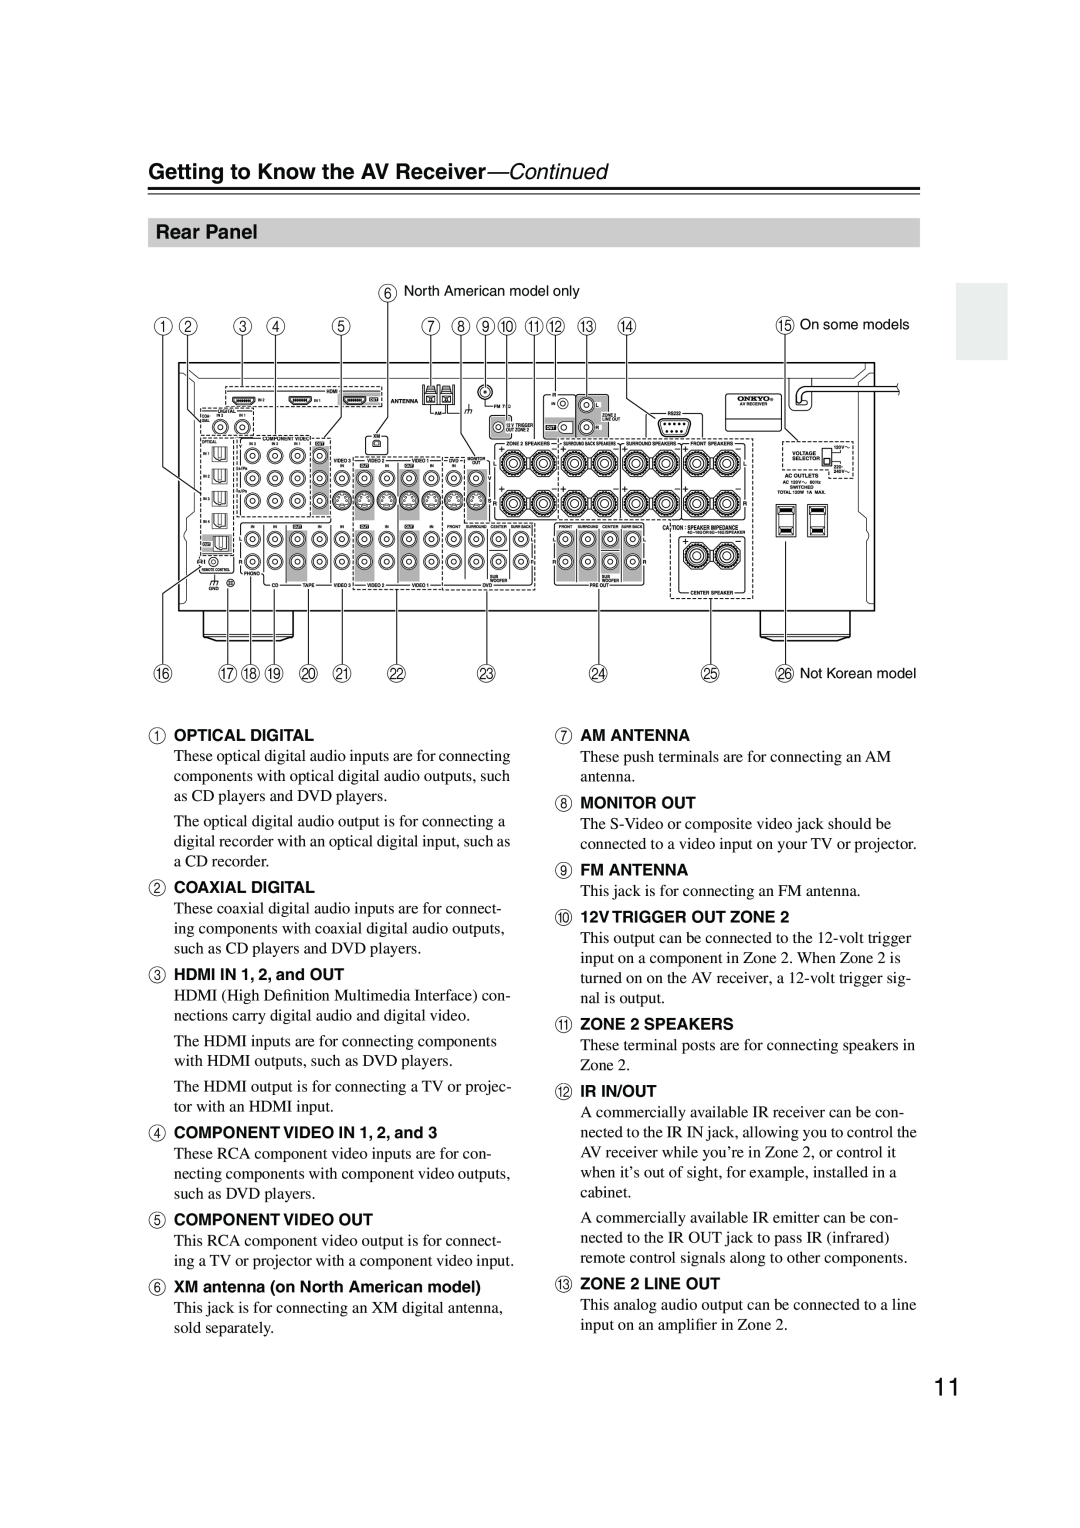 Onkyo SR804 instruction manual Rear Panel, Getting to Know the AV Receiver-Continued 